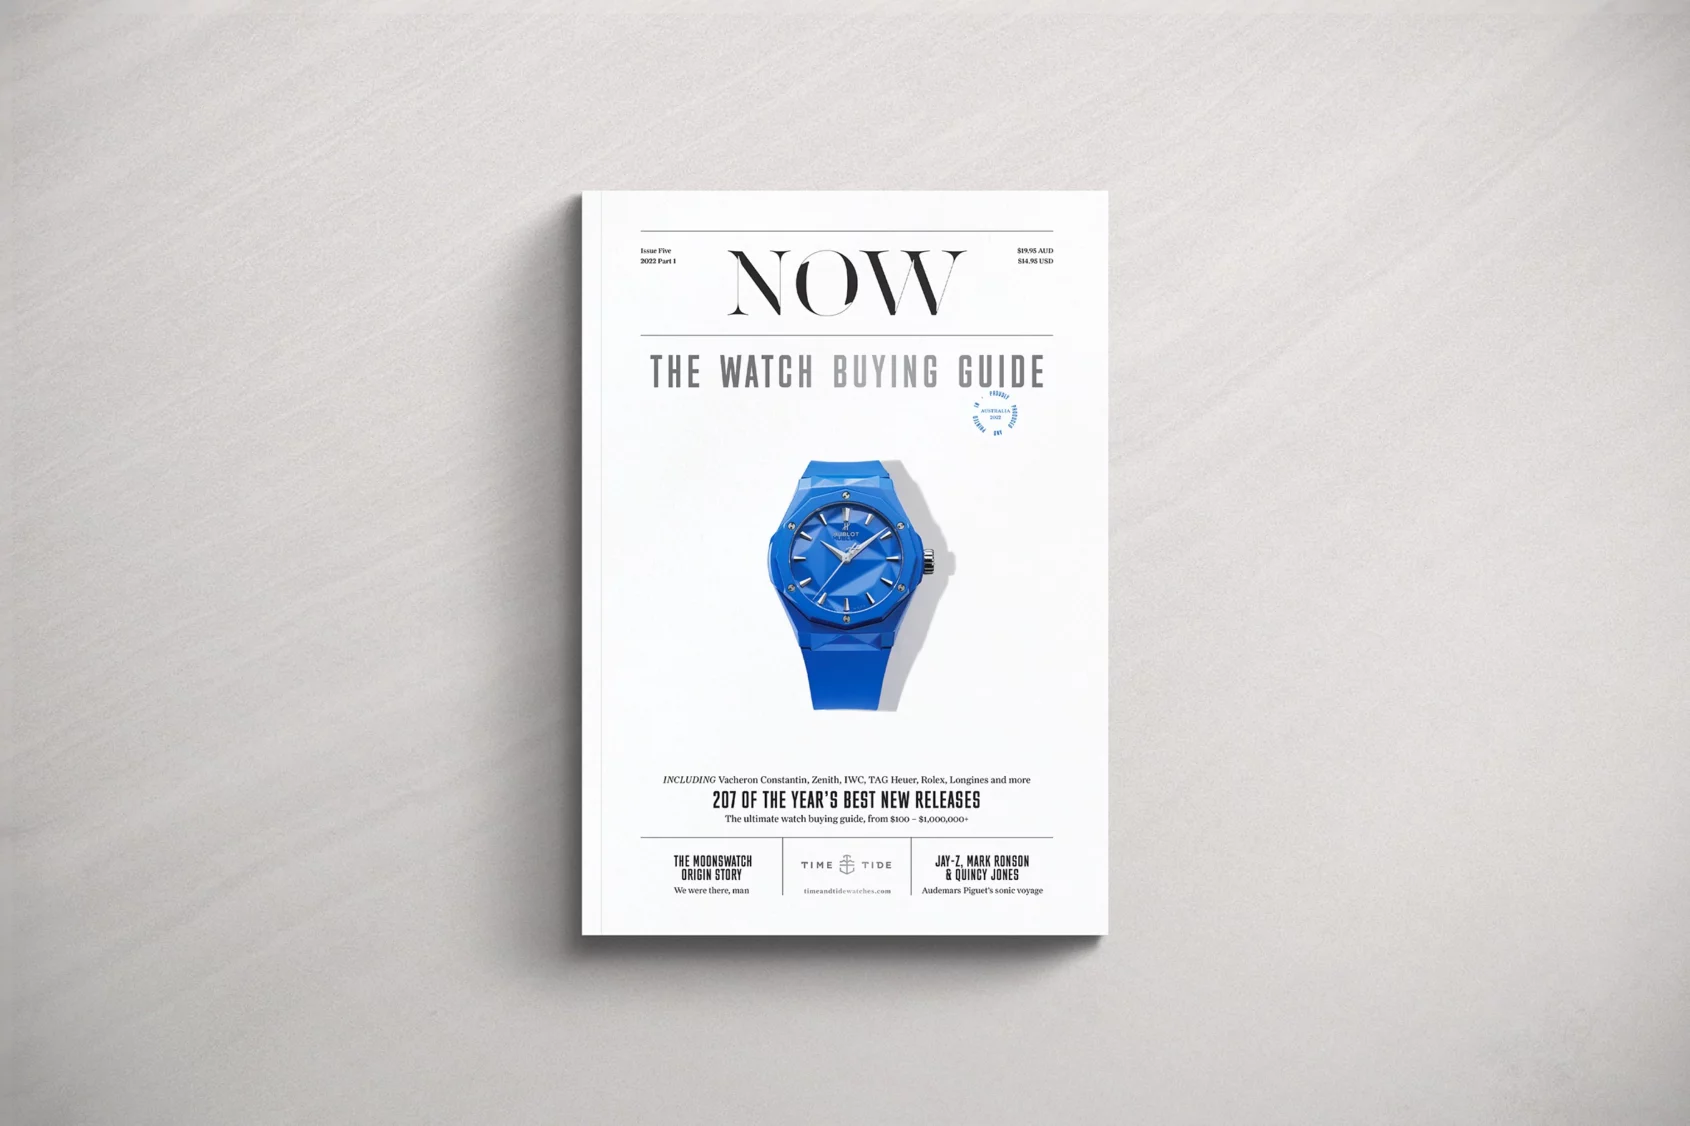 Five reasons to buy the new issue of NOW, the Time+Tide watch buying guide